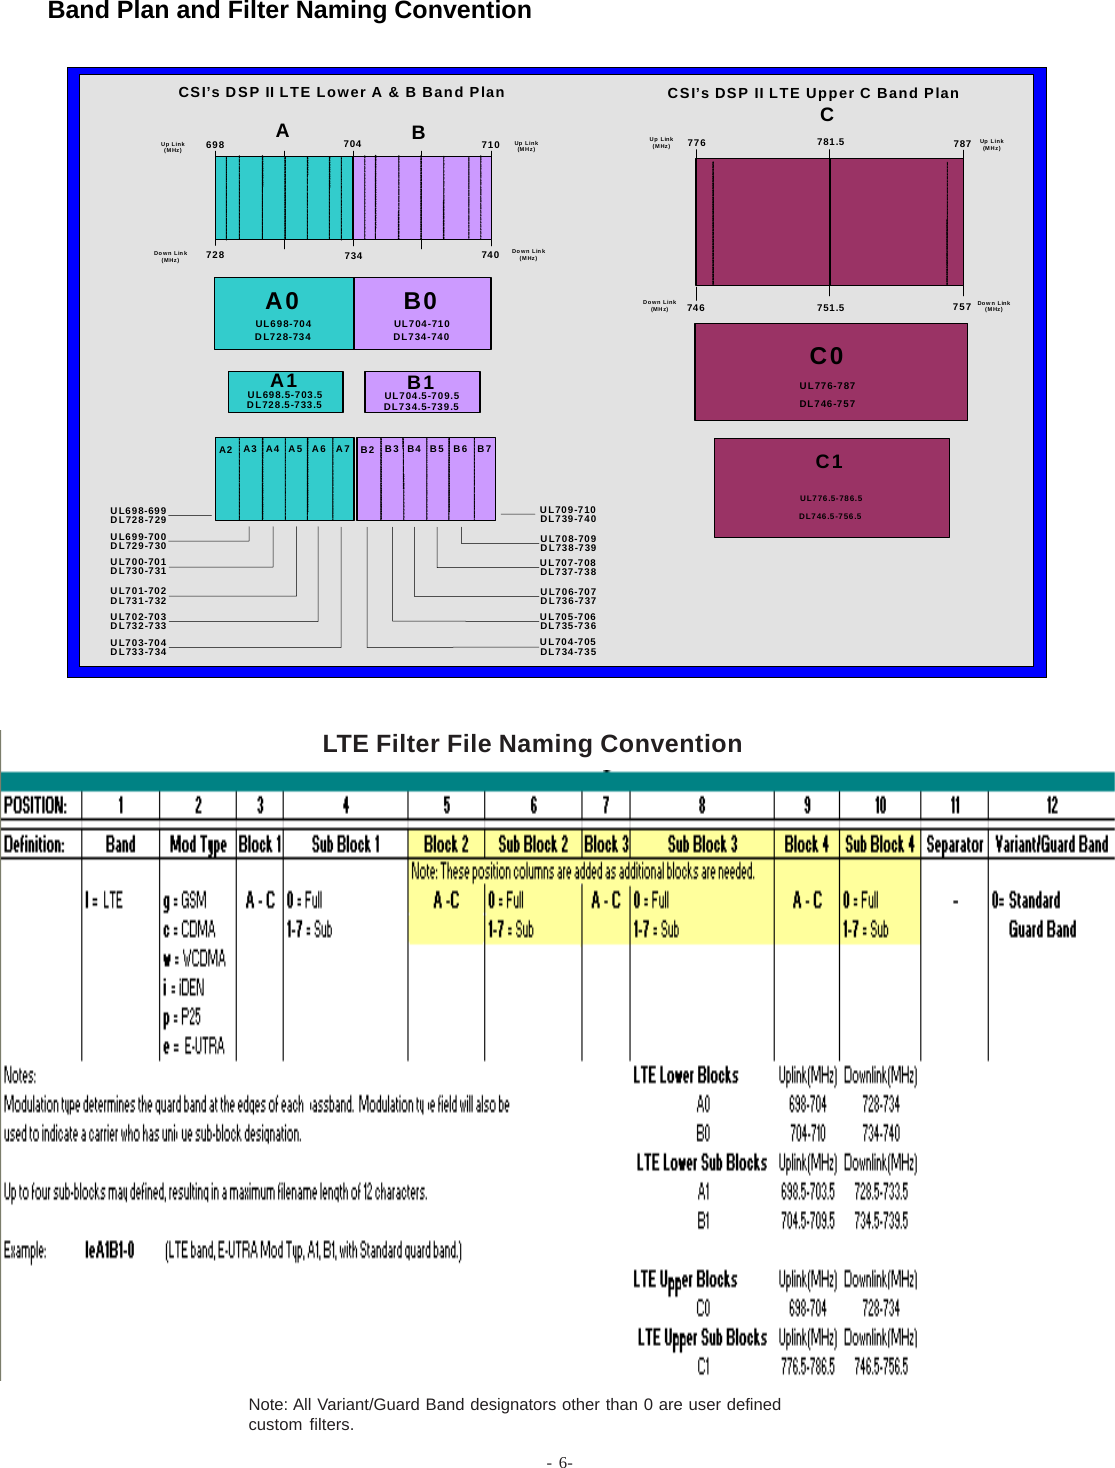 - 6-CSI’s DSP II LTE Lower A &amp; B Band PlanUp Link (MHz)Down Link (MHz) 728698A0UL698-704DL728-734B0UL704-710DL734-740A1UL698.5-703.5DL728.5-733.5B1UL704.5-709.5DL734.5-739.5AB704 710734 740Up Link (MHz)Down Link (MHz)A2 A3 A4 A5 A6 A7UL698-699DL728-729UL699-700DL729-730UL700-701DL730-731UL701-702DL731-732UL702-703DL732-733UL703-704DL733-734B2 B3 B4 B5 B6 B7UL704-705DL734-735UL705-706DL735-736UL706-707DL736-737UL707-708DL737-738UL708-709DL738-739UL709-710DL739-740CSI’s DSP II LTE Upper C Band PlanUp Link (MHz)Down  Link (MHz) 746776C0UL776-787DL746-757C1UL776.5-786.5DL746.5-756.5C787757Up Link (MHz)Down Link (MHz)781.5751.5Note: All Variant/Guard Band designators other than 0 are user definedcustom filters.Band Plan and Filter Naming Convention LTE Filter File Naming Convention